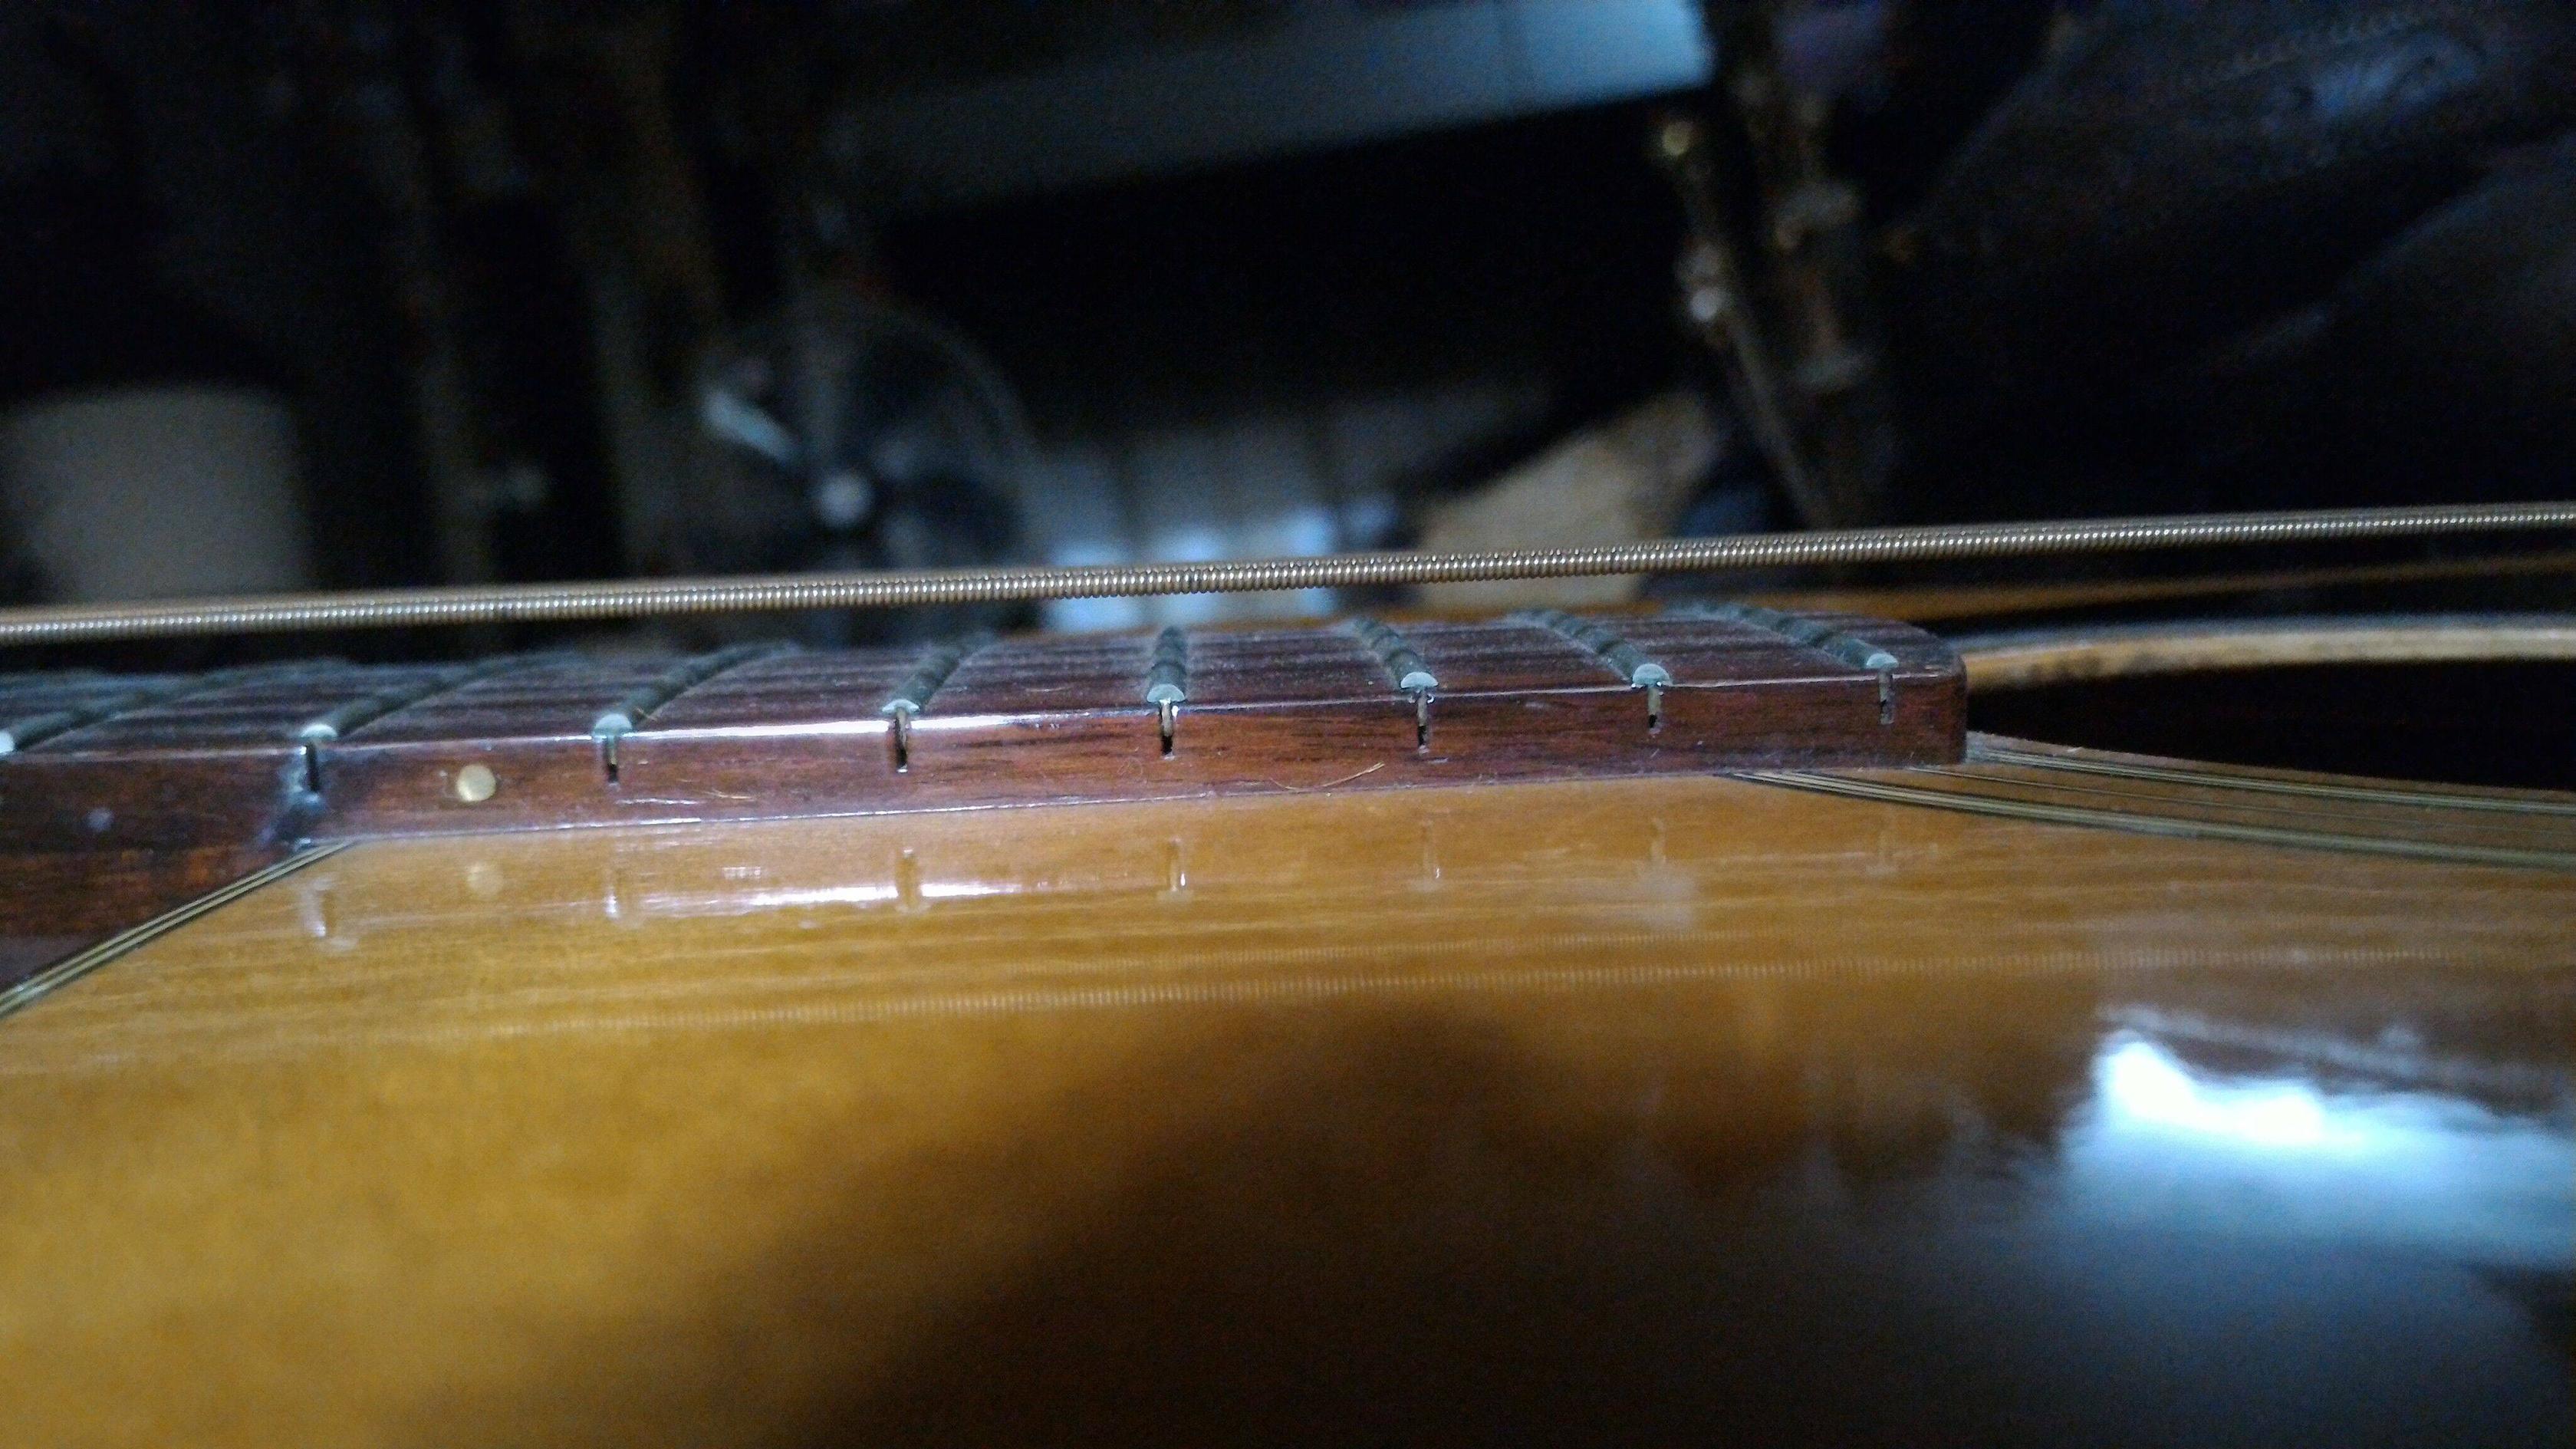 maintenance - I think my guitar strings are wound too tight and I ...